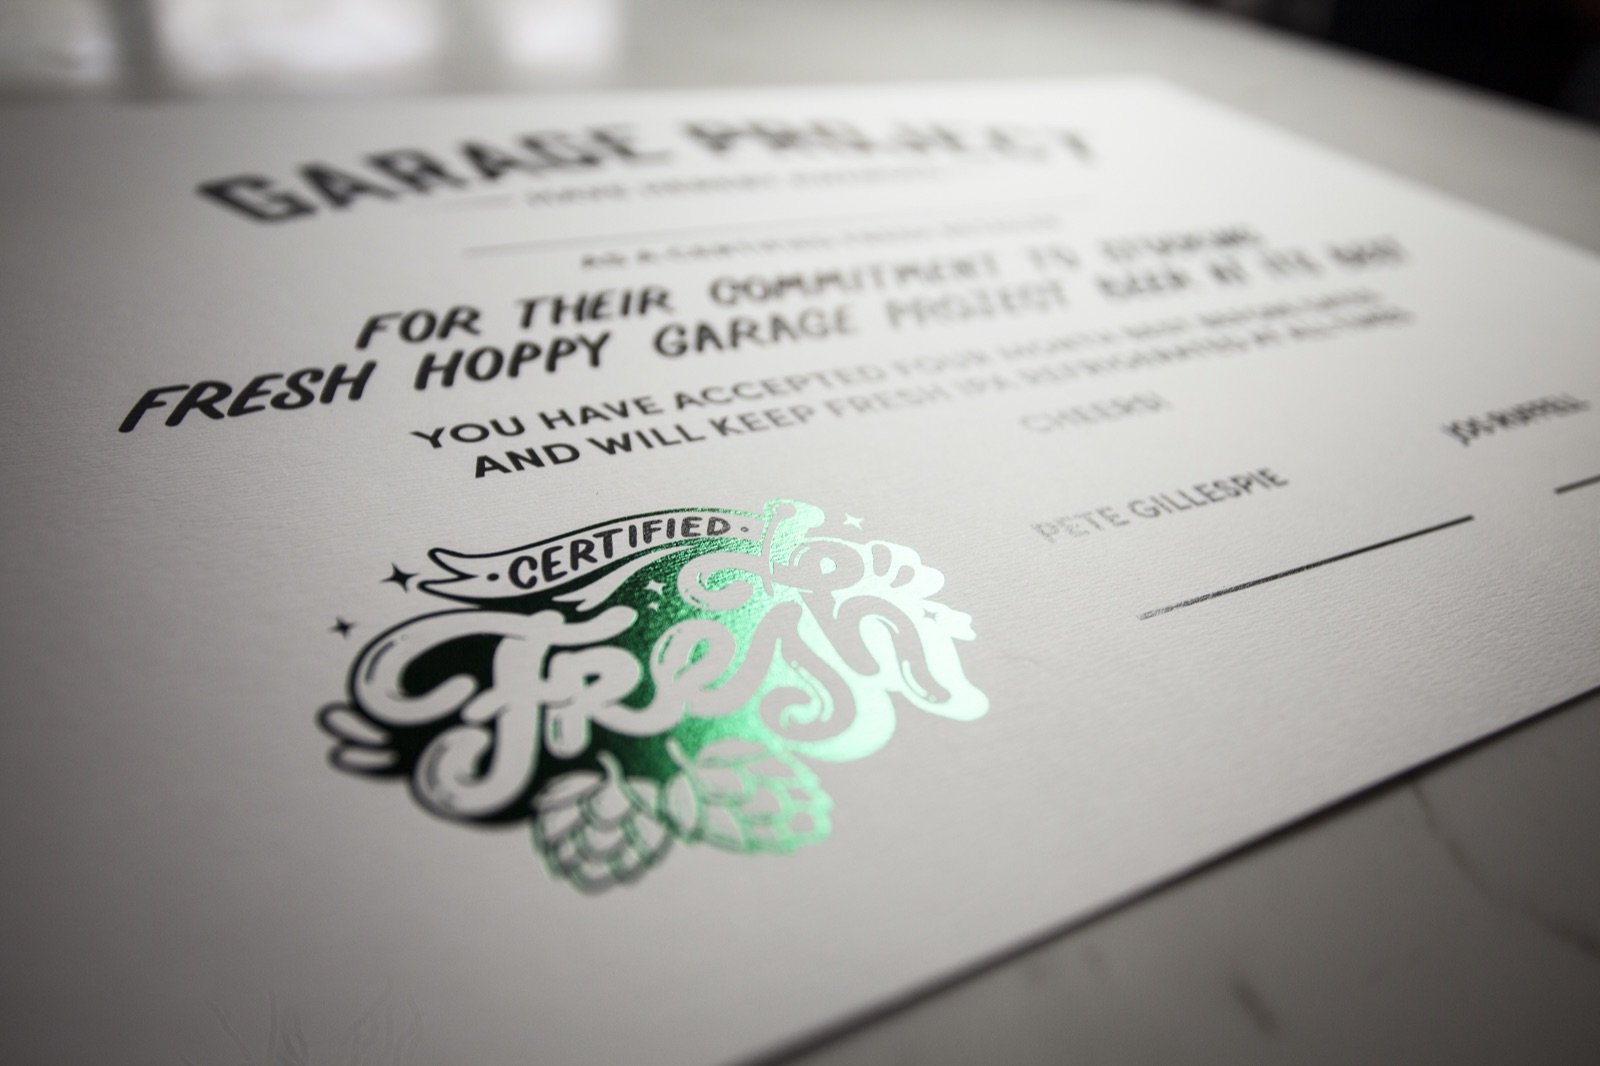 Printing Garage Project's certified fresh certificates.